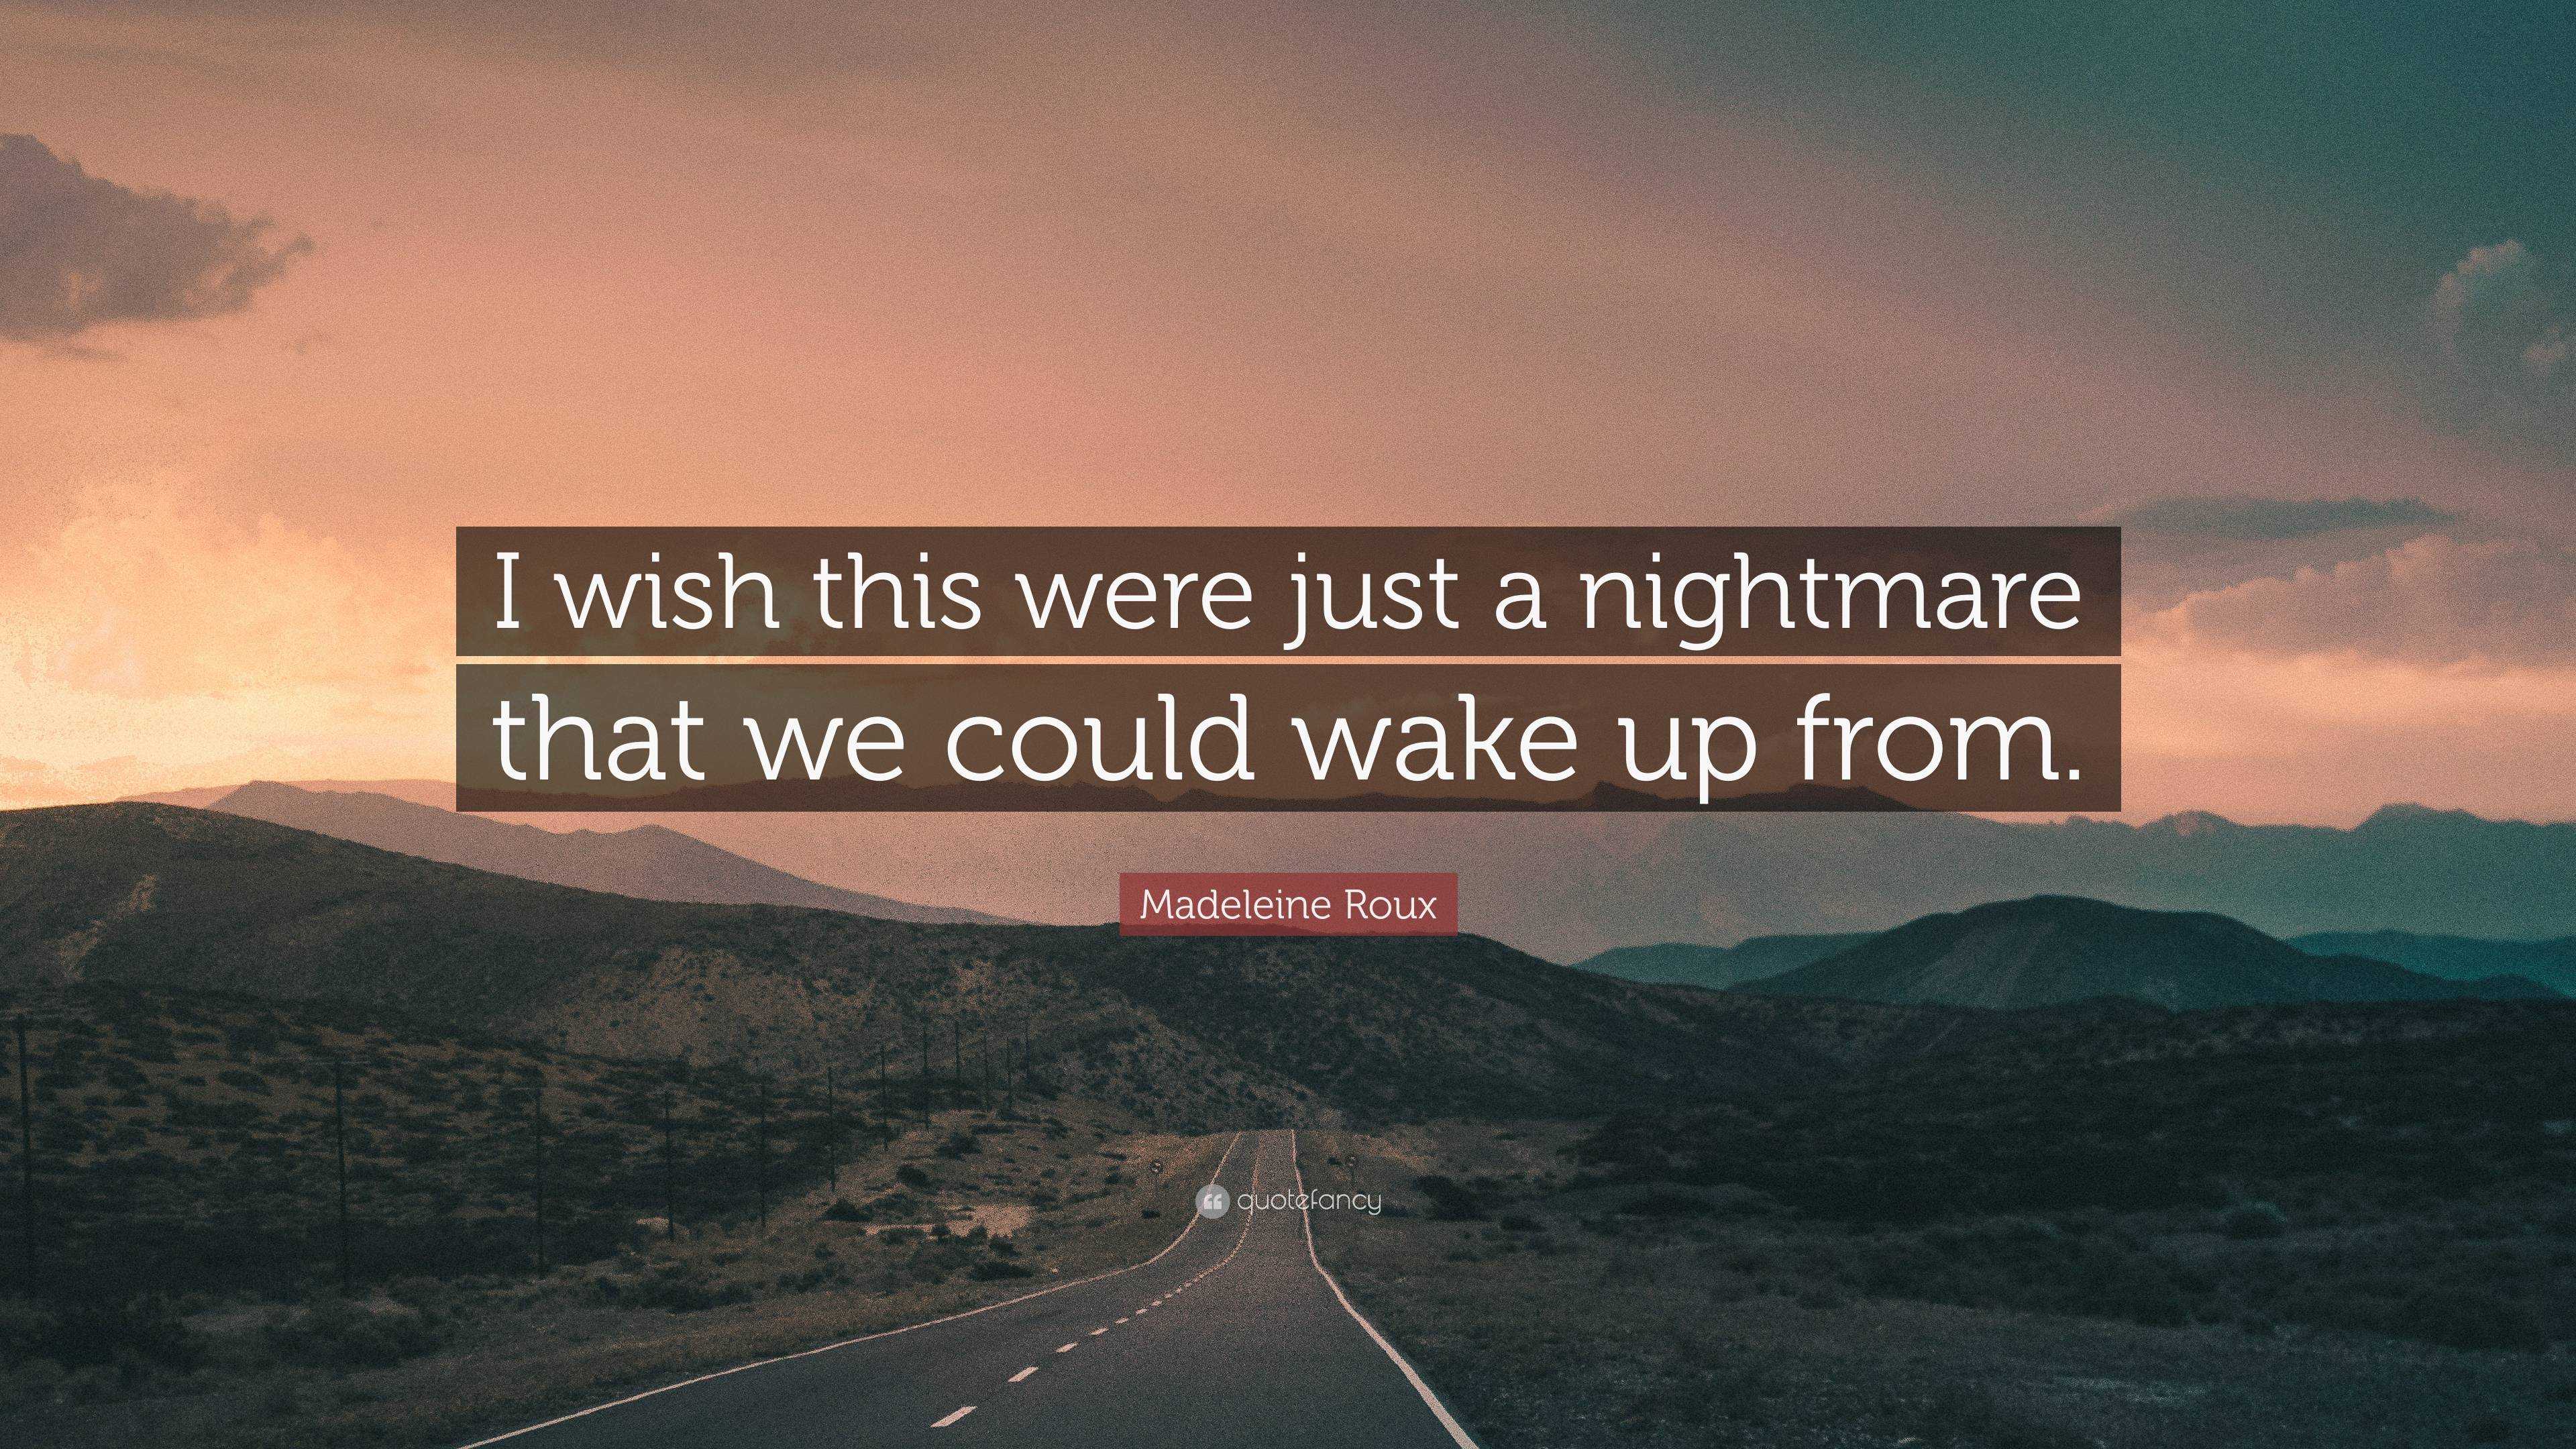 Madeleine Roux Quote: “I Wish This Were Just A Nightmare That We Could Wake Up From.”